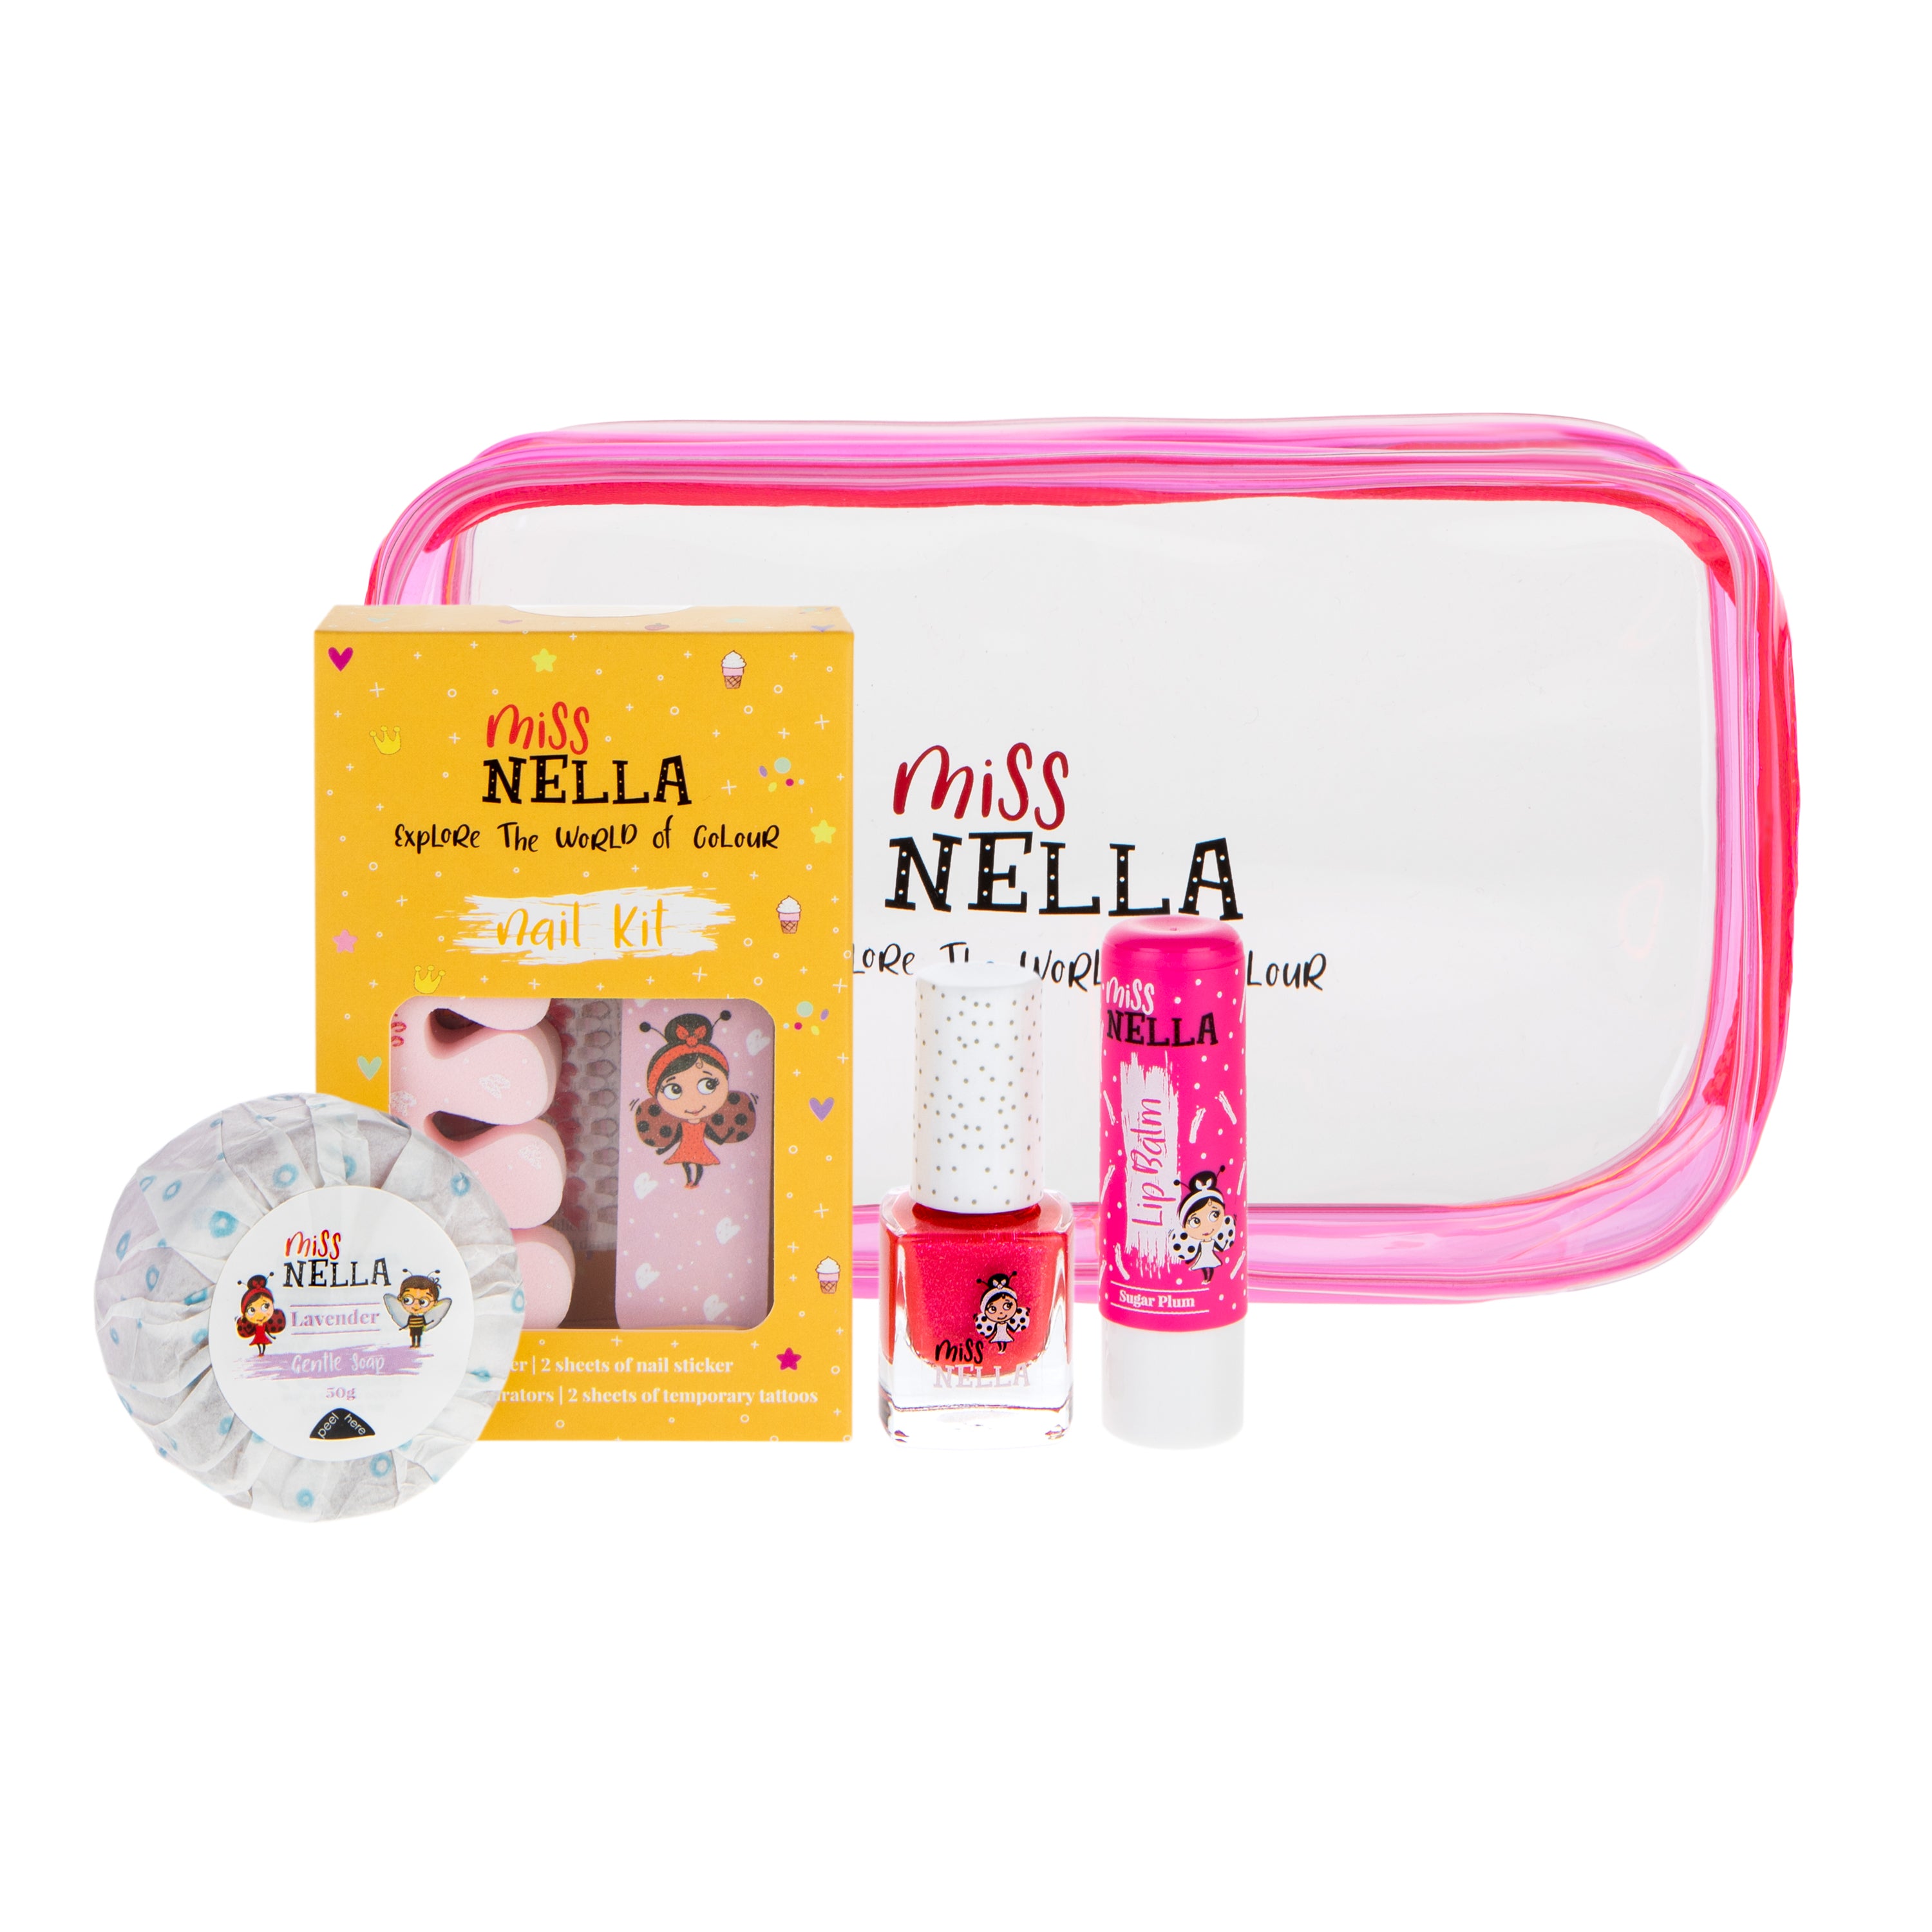 Pamper Party Pink Toiletry Bag: Kids' Cosmetics